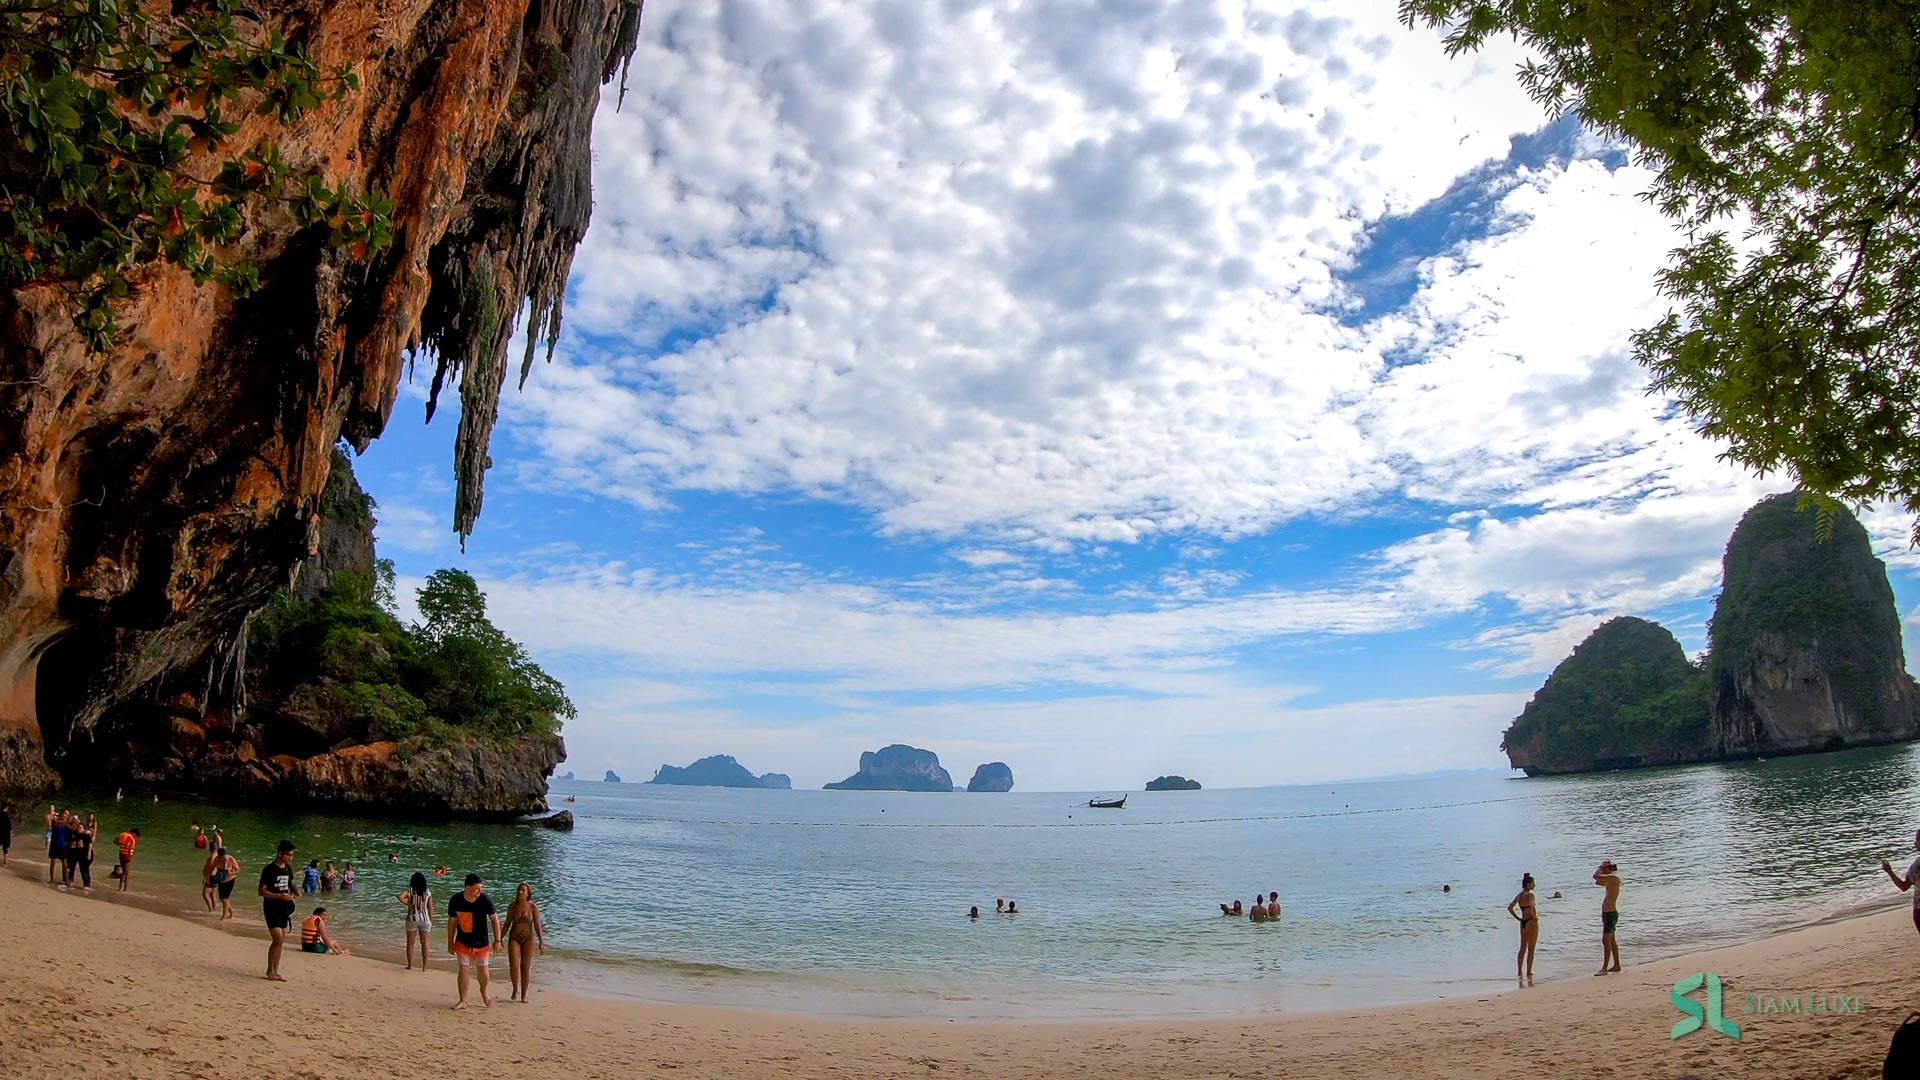 Phra Nang Cave, one of the most famous tourist destination in Krabi